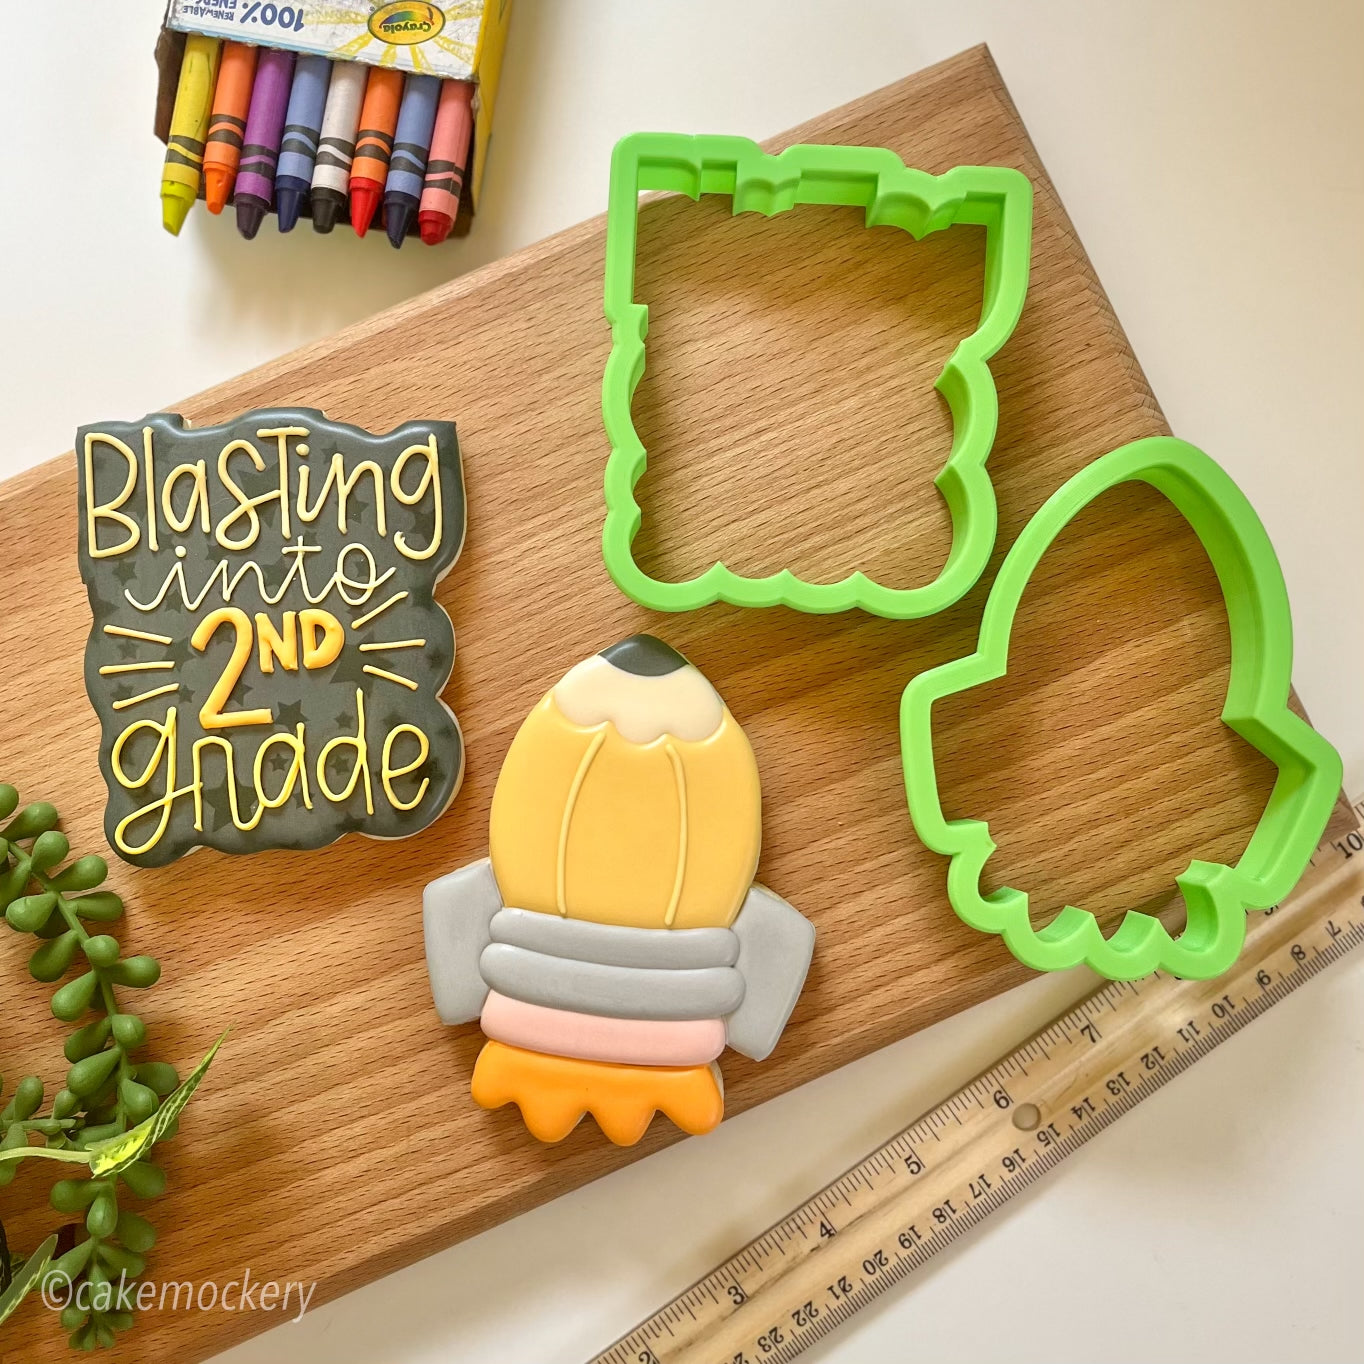 Blasting Into Plaque Cookie Cutter Set of 2